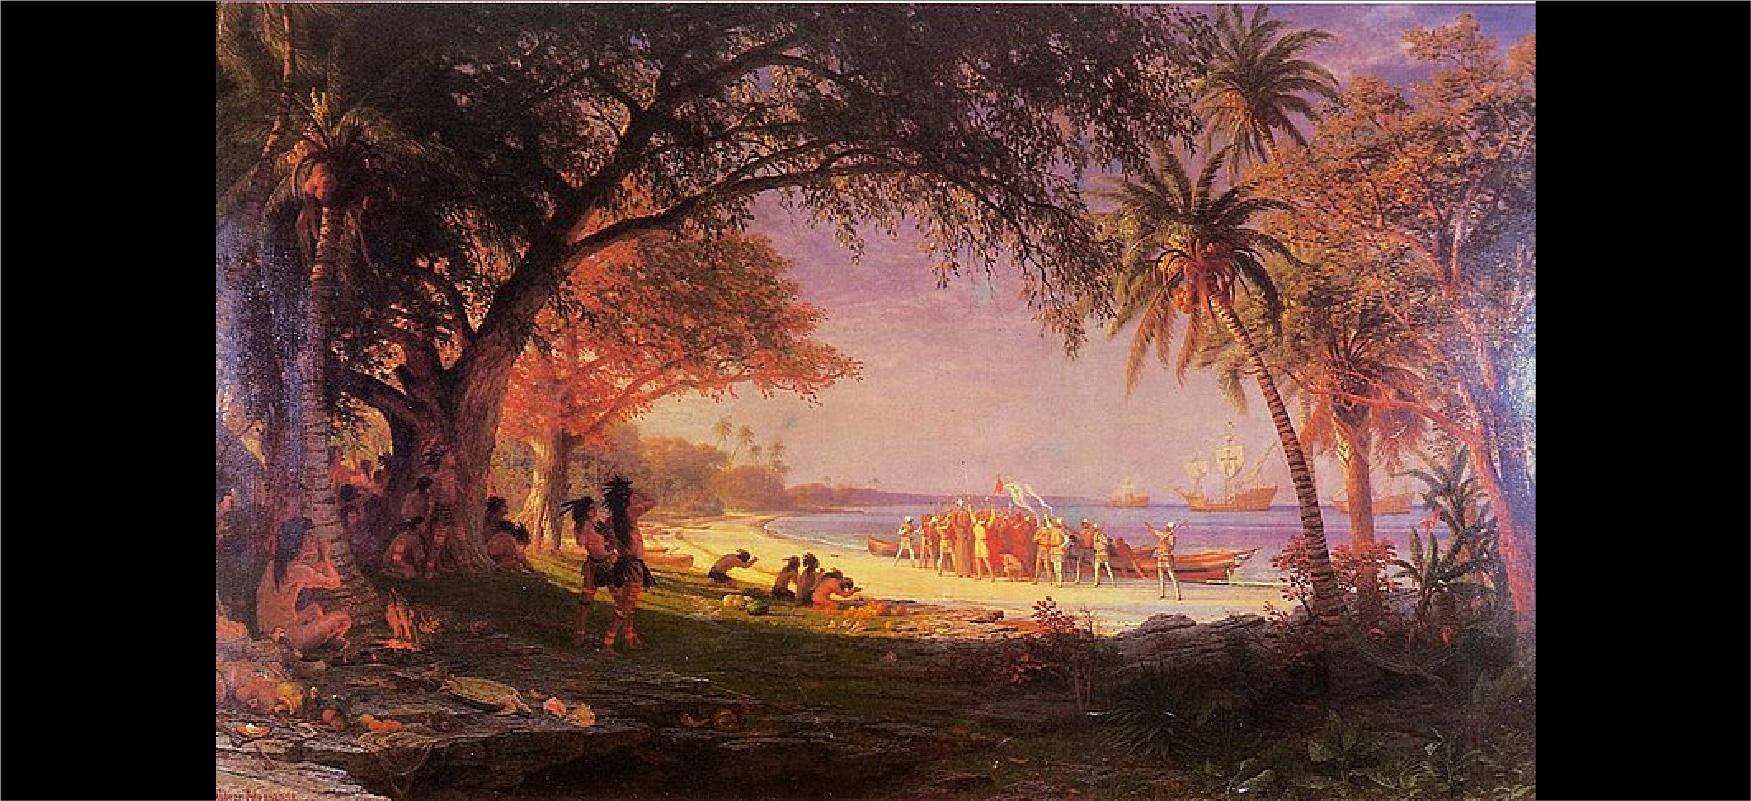 This painting shows an open area in a forest leading to a beach and water. Trees are on the left and right forming an arc at the top. The bottom left shows people with leaves tied around their waists and feathers in their hair. Most have stripes painted on their bodies. The people are sitting, squatting, and standing in front of the trees while some hide behind the trees. A few are in the middle opening bowing. Fruits and vegetables are strewn all over the ground. In the center on the beach, people in armor, long pants and robes, stand with their arms stretched looking toward the group’s center at white flags with crosses being held up high. A man in a long brown robe with a cross above his head stands in the center. One man wearing just pants bows down on one knee in front of the group. Boats are behind them on the shore with three large ships in the background further out in the water.